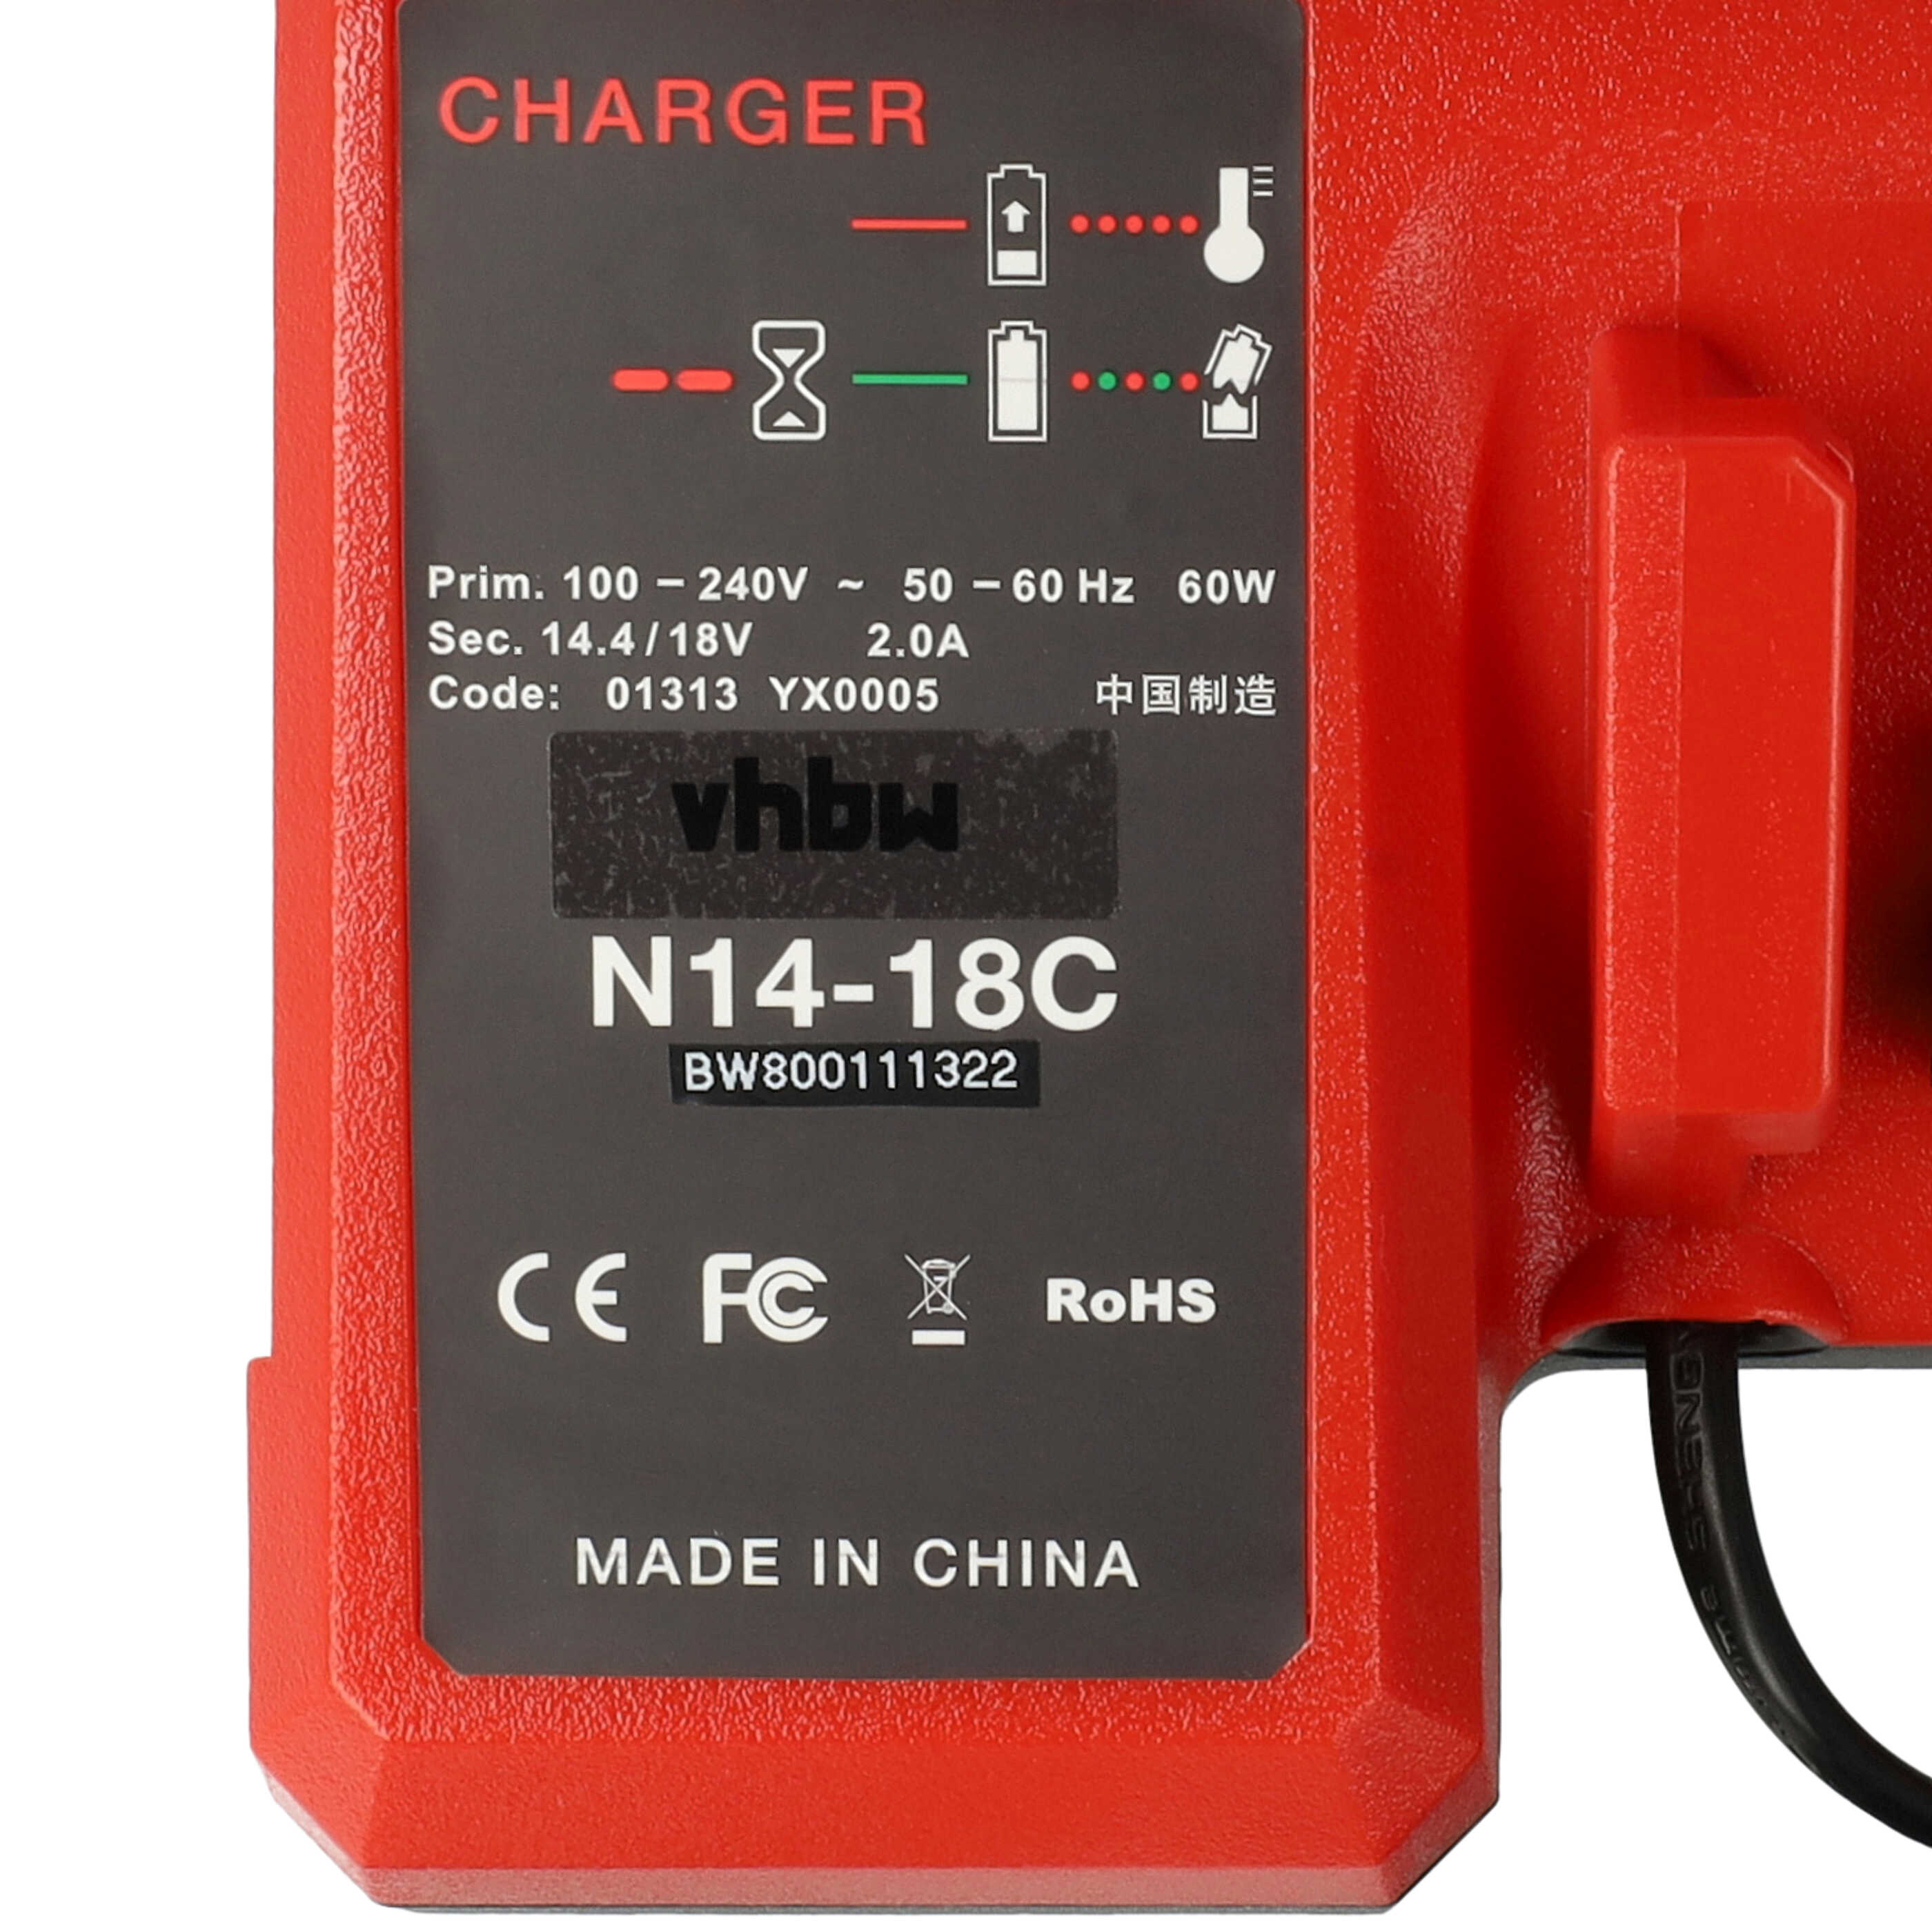 Charger replaces Milwaukee M18, 4932352959, M14 for BTIPower Tool Batteries etc. Li-Ion 14.4 V / 18 V